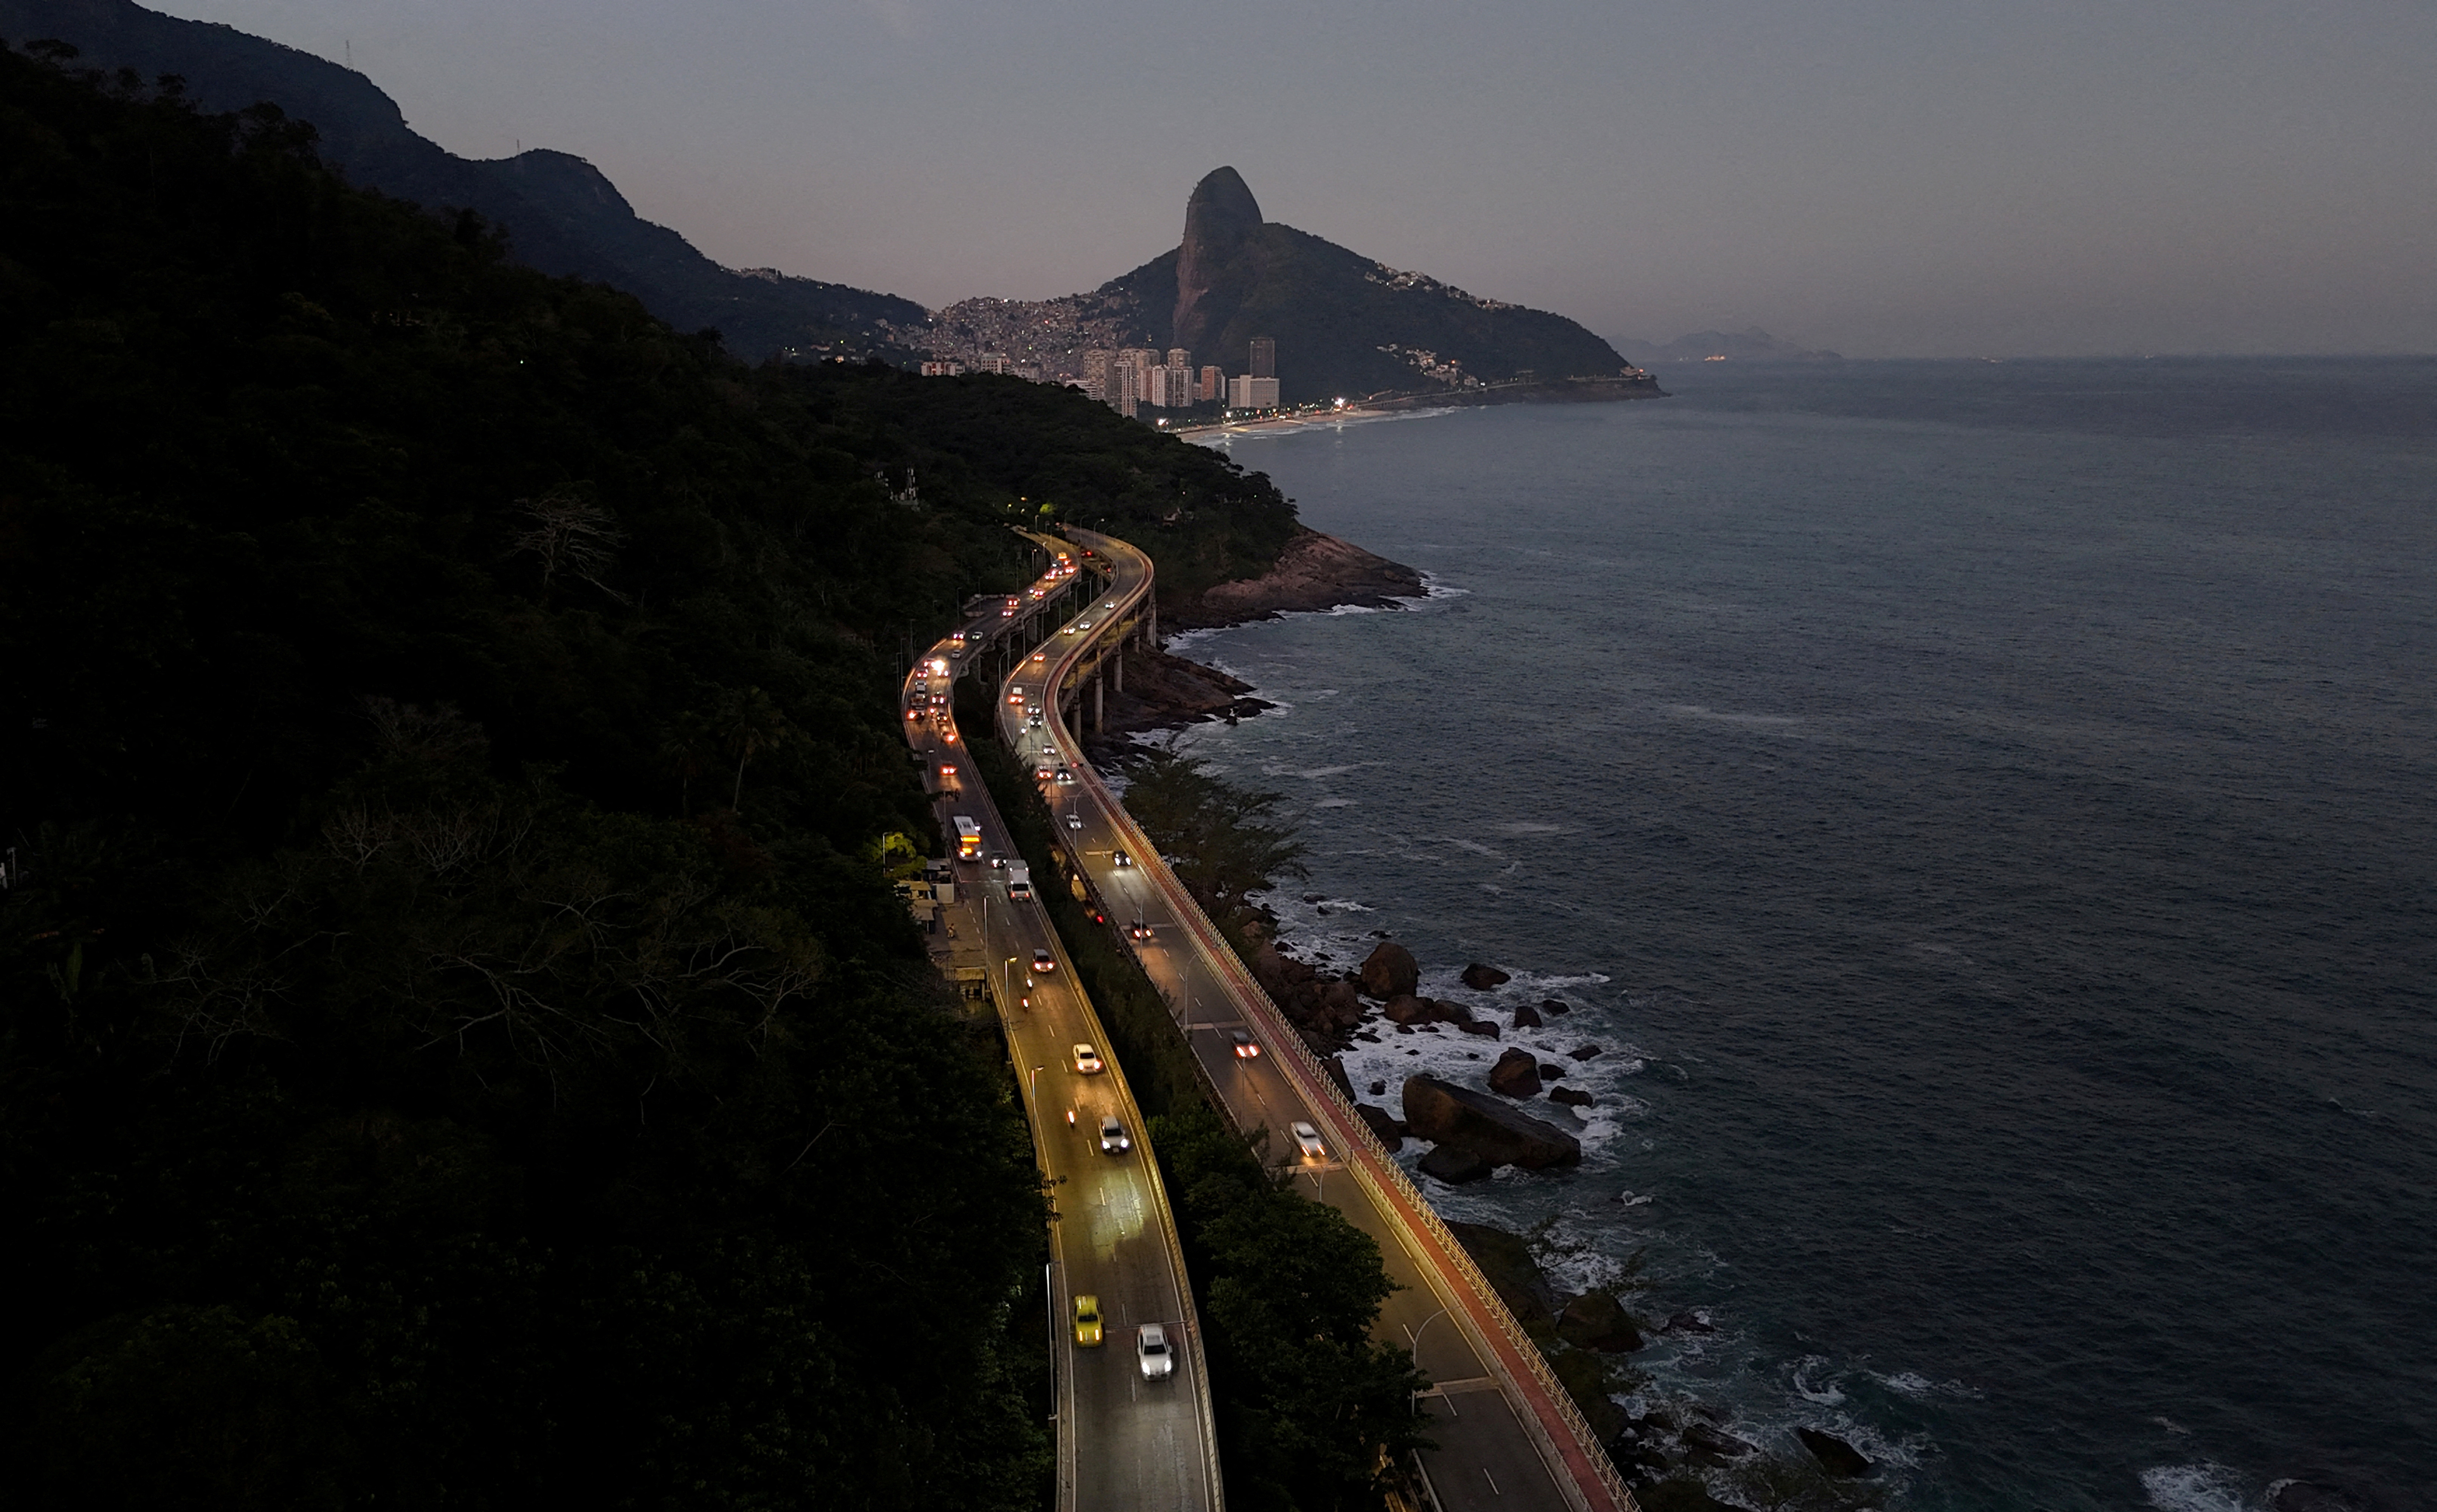 A drone view shows a road with the Dois Irmaos (Two brothers) peaks in the background Rio de Janeiro